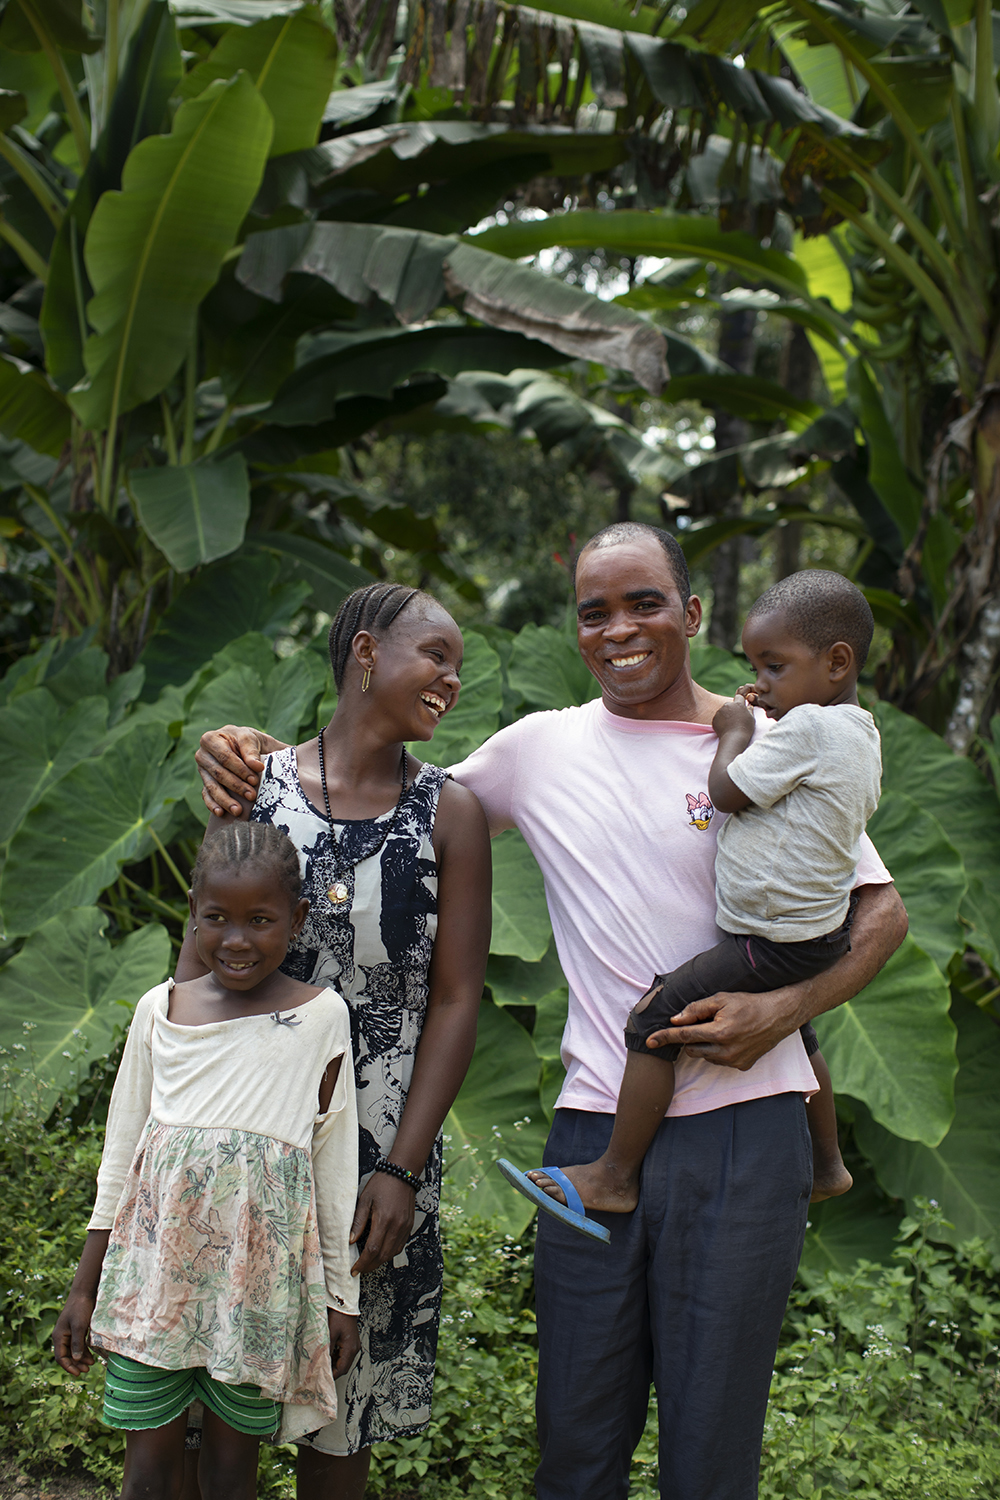 This is Komba, who is head teacher in a remote community near the Guinea border, and lives with his wife and five children